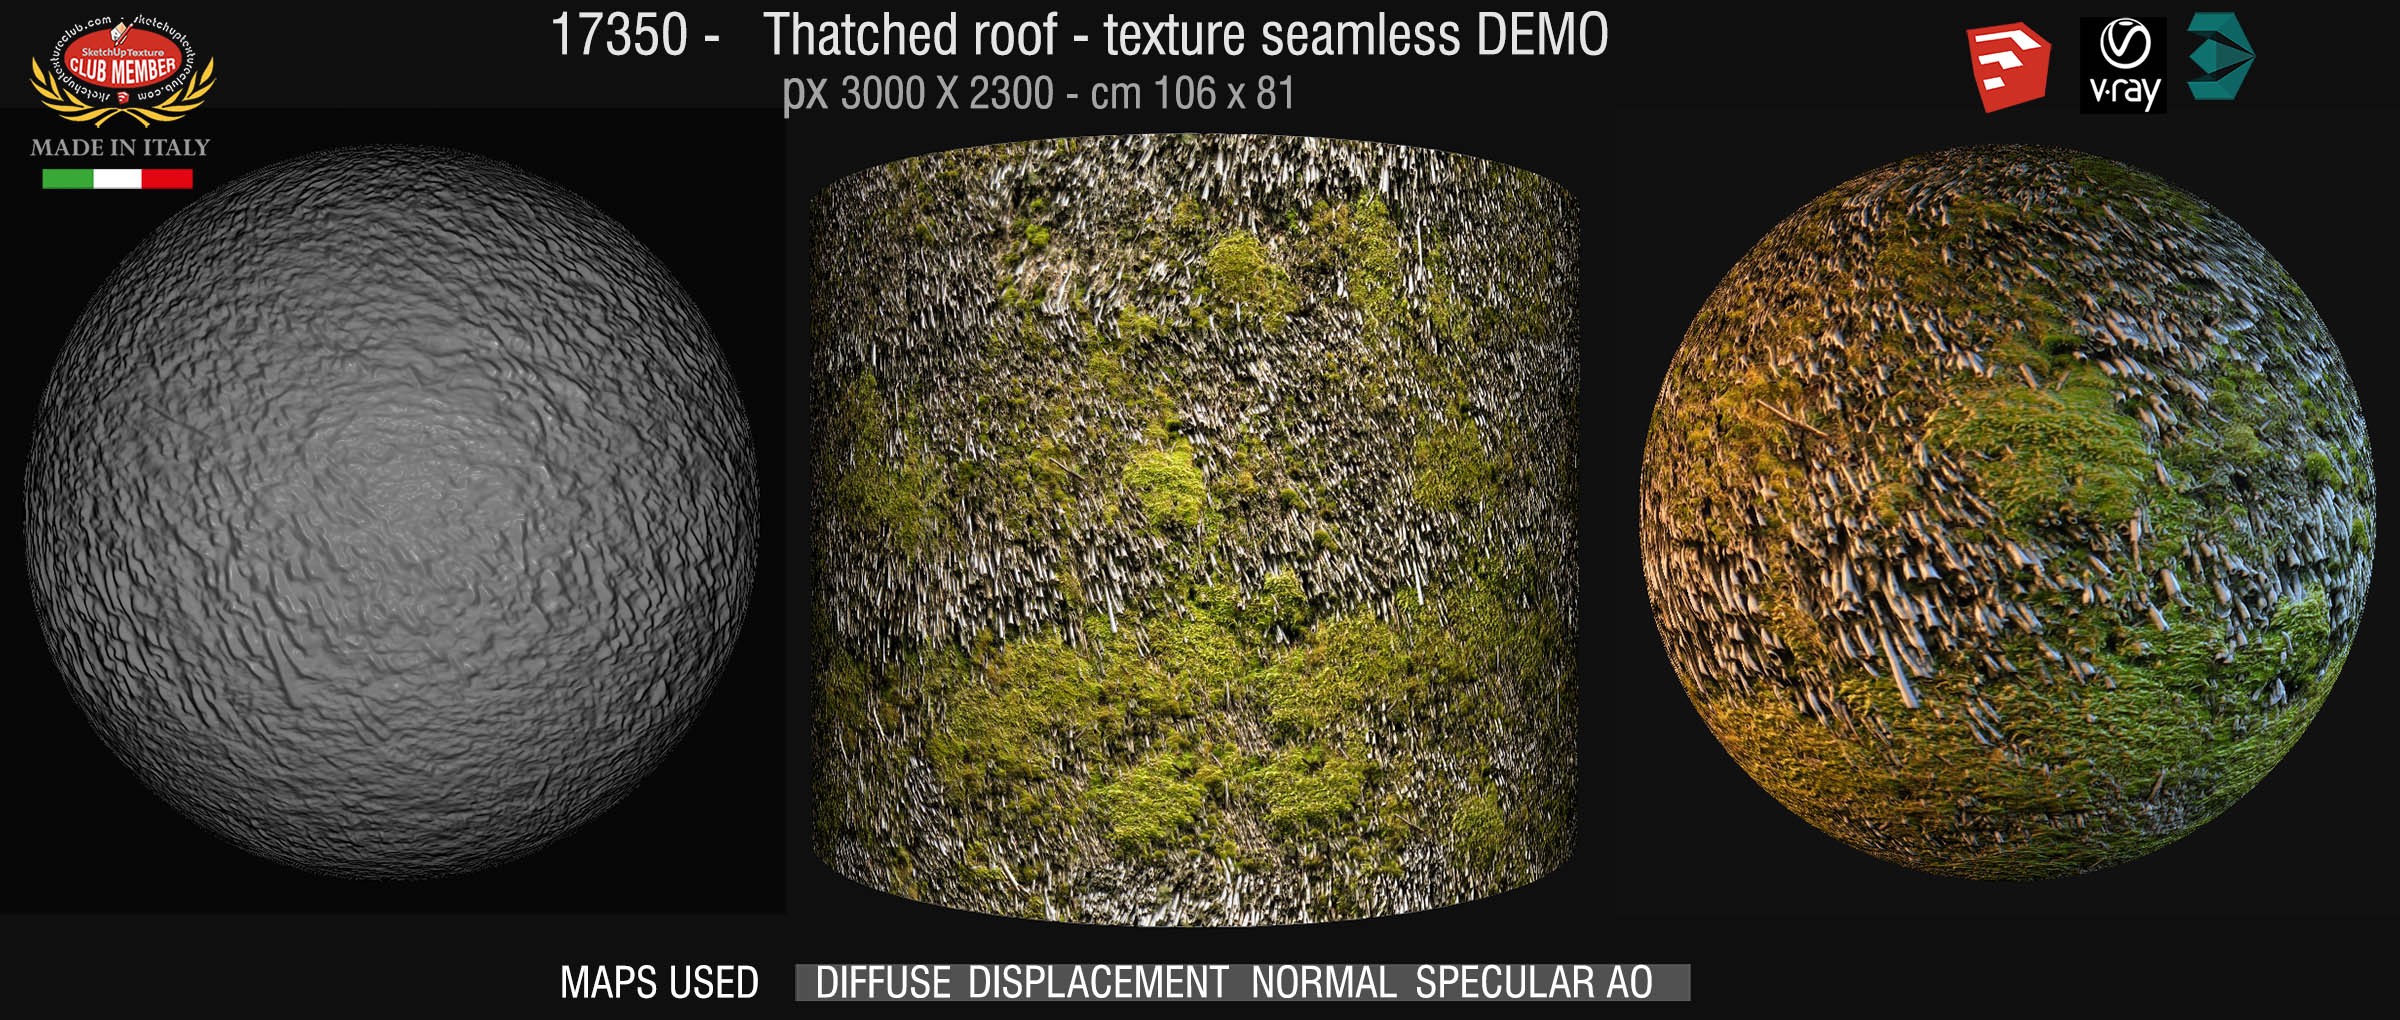 17350 Thatched roof texture seamless + maps DEMO